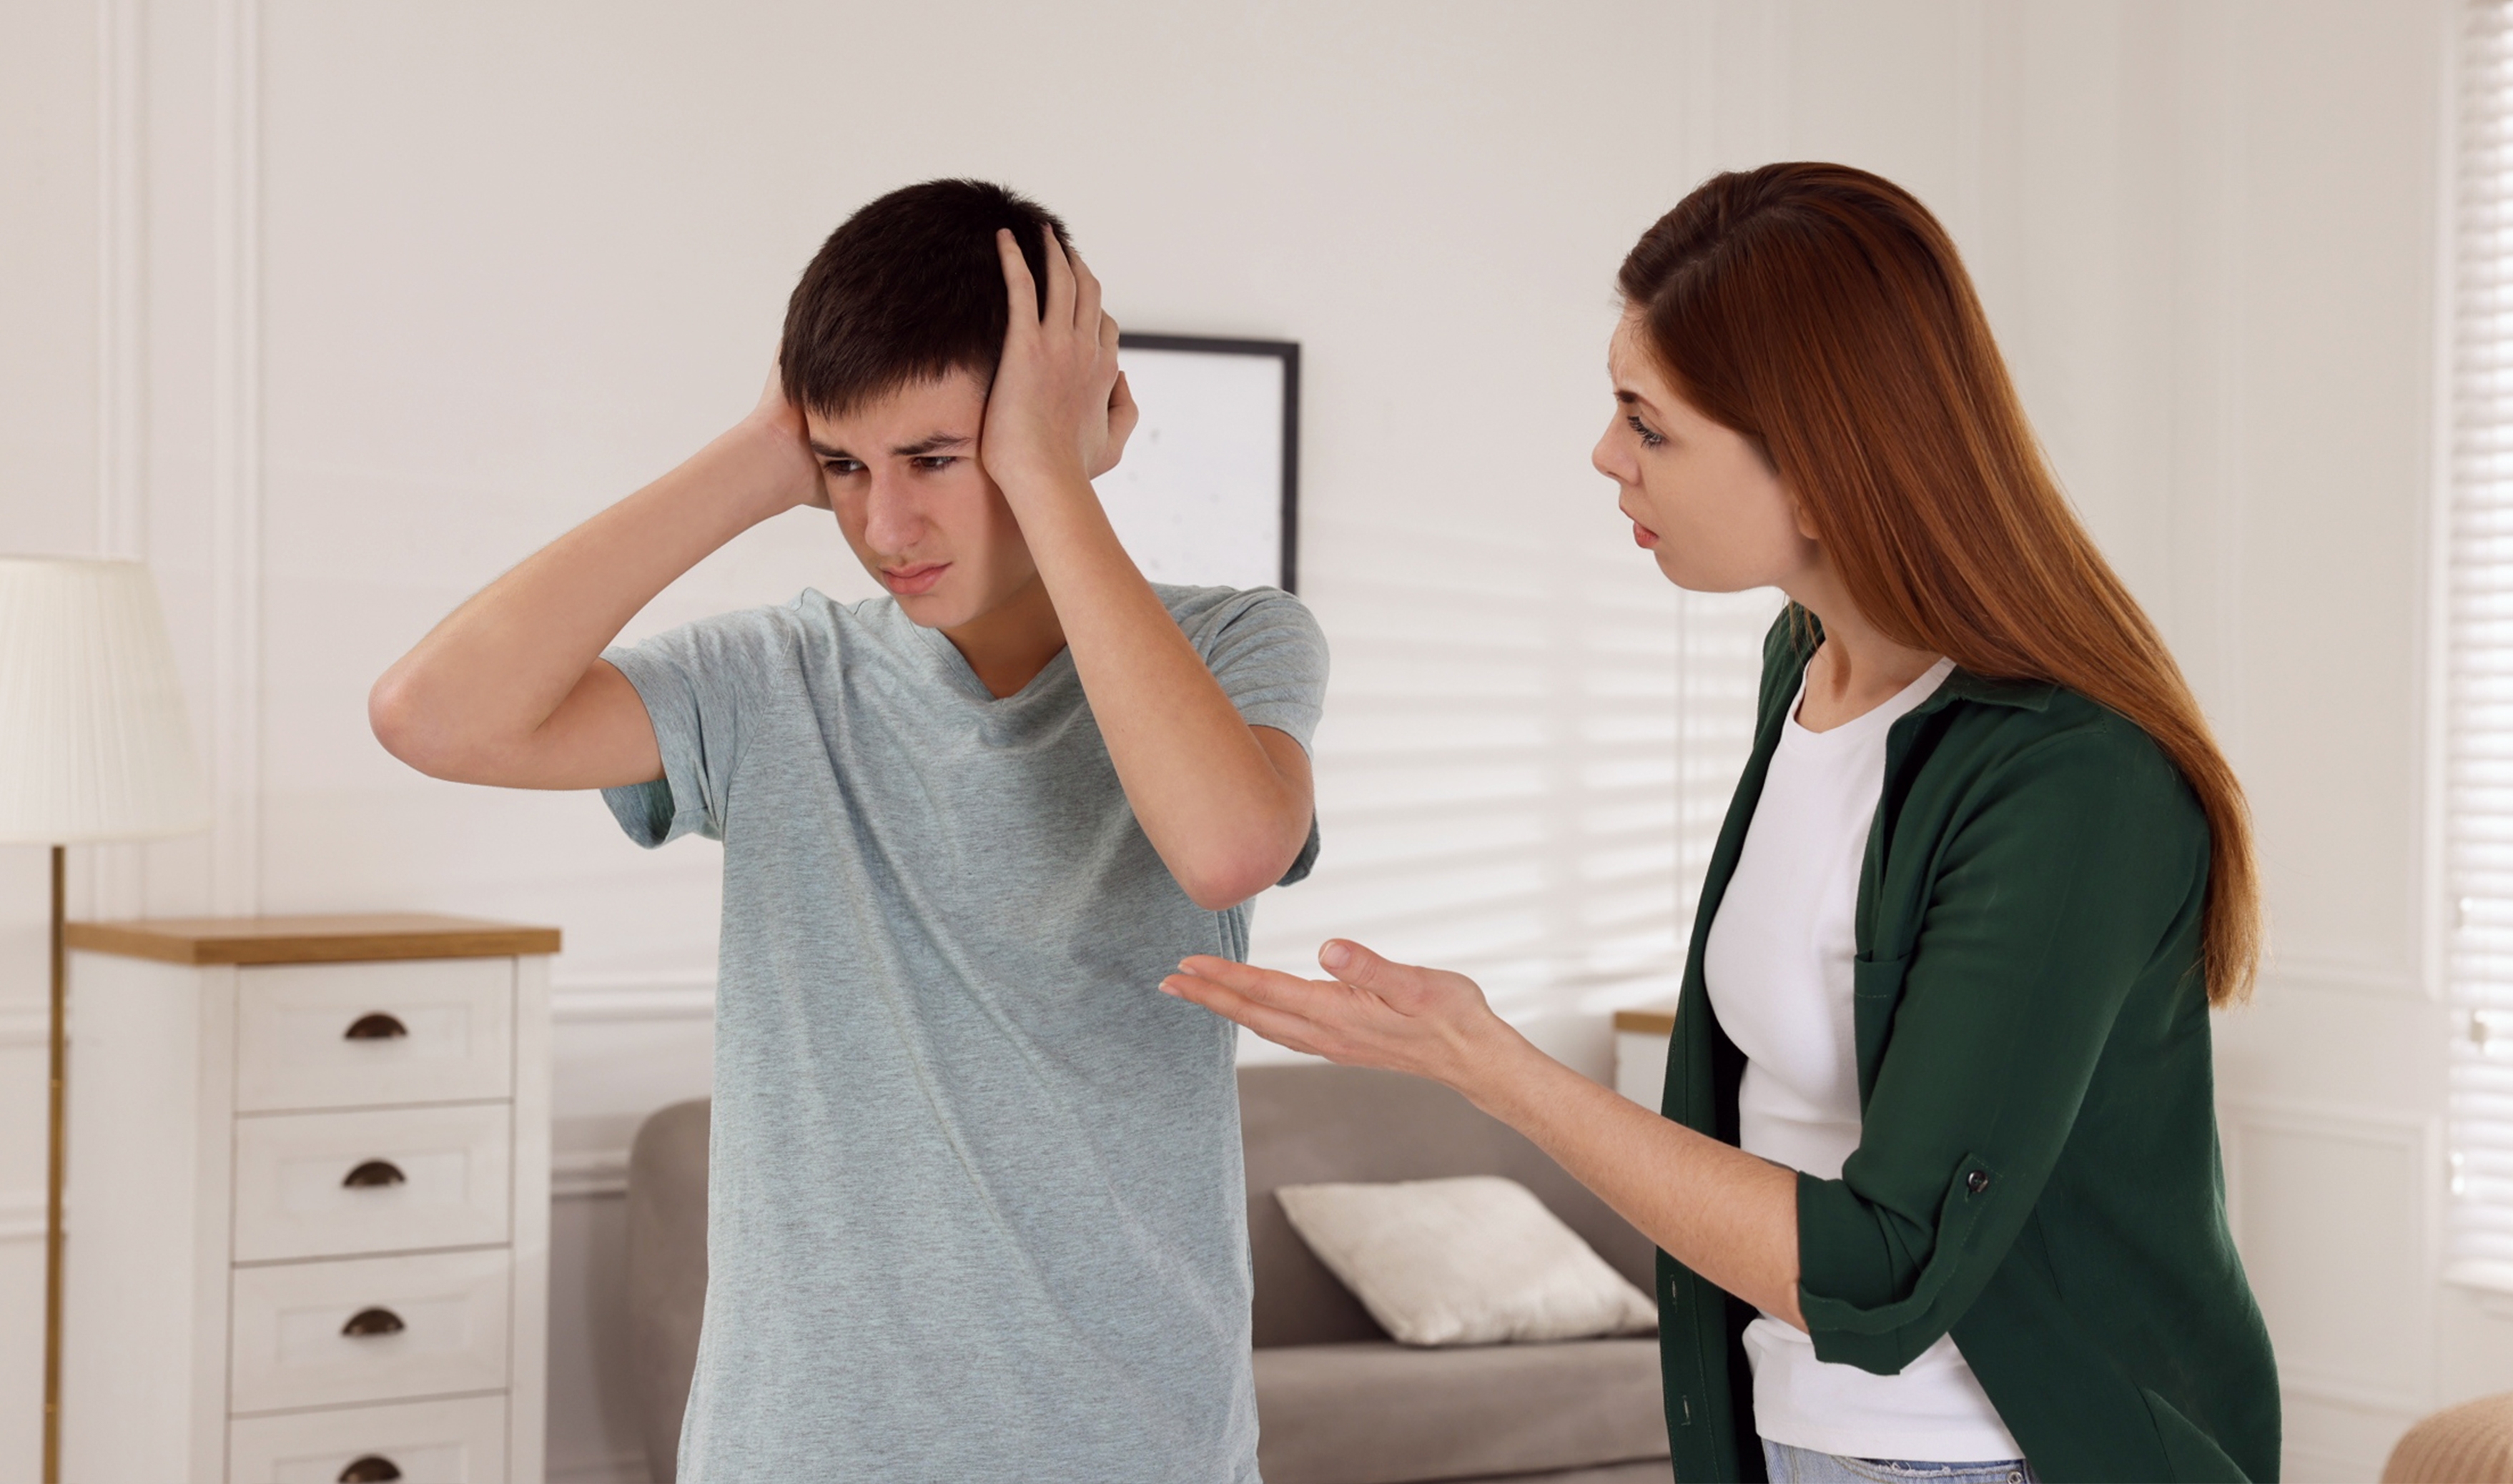 A teenager and his mother having an argument | Source: Shutterstock